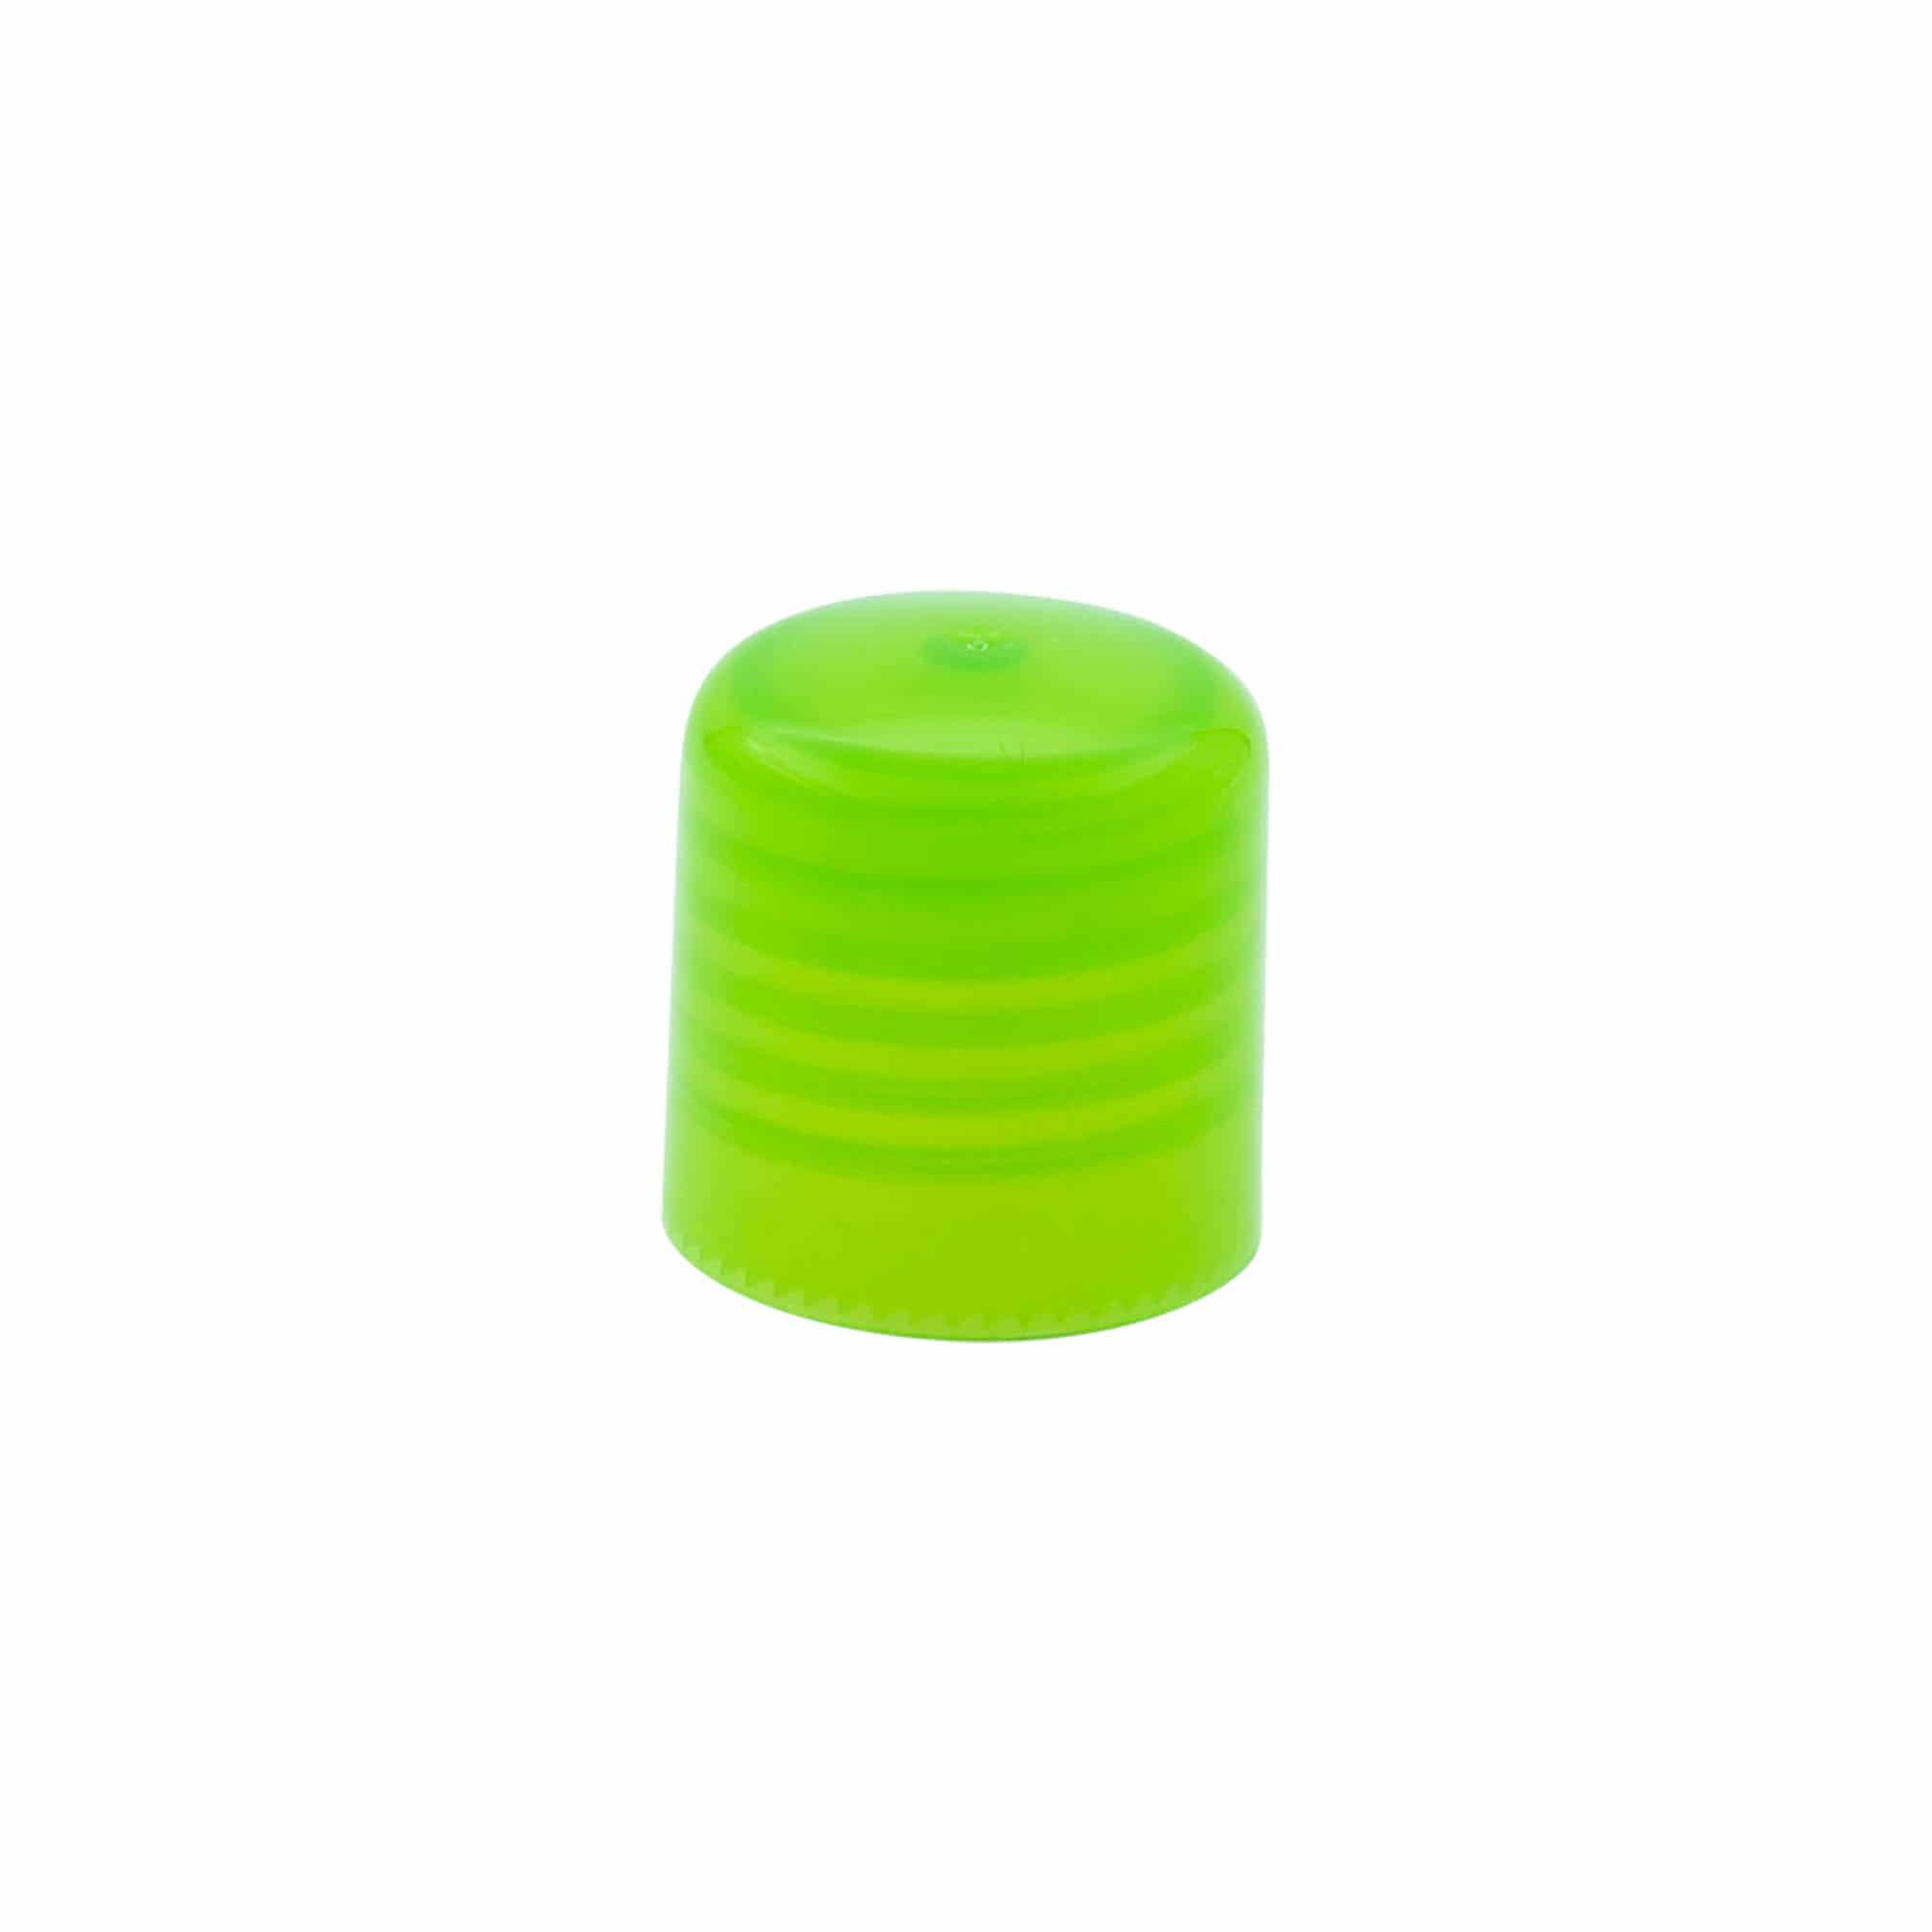 Screw cap with spray insert, PP plastic, green, for opening: GPI 24/410